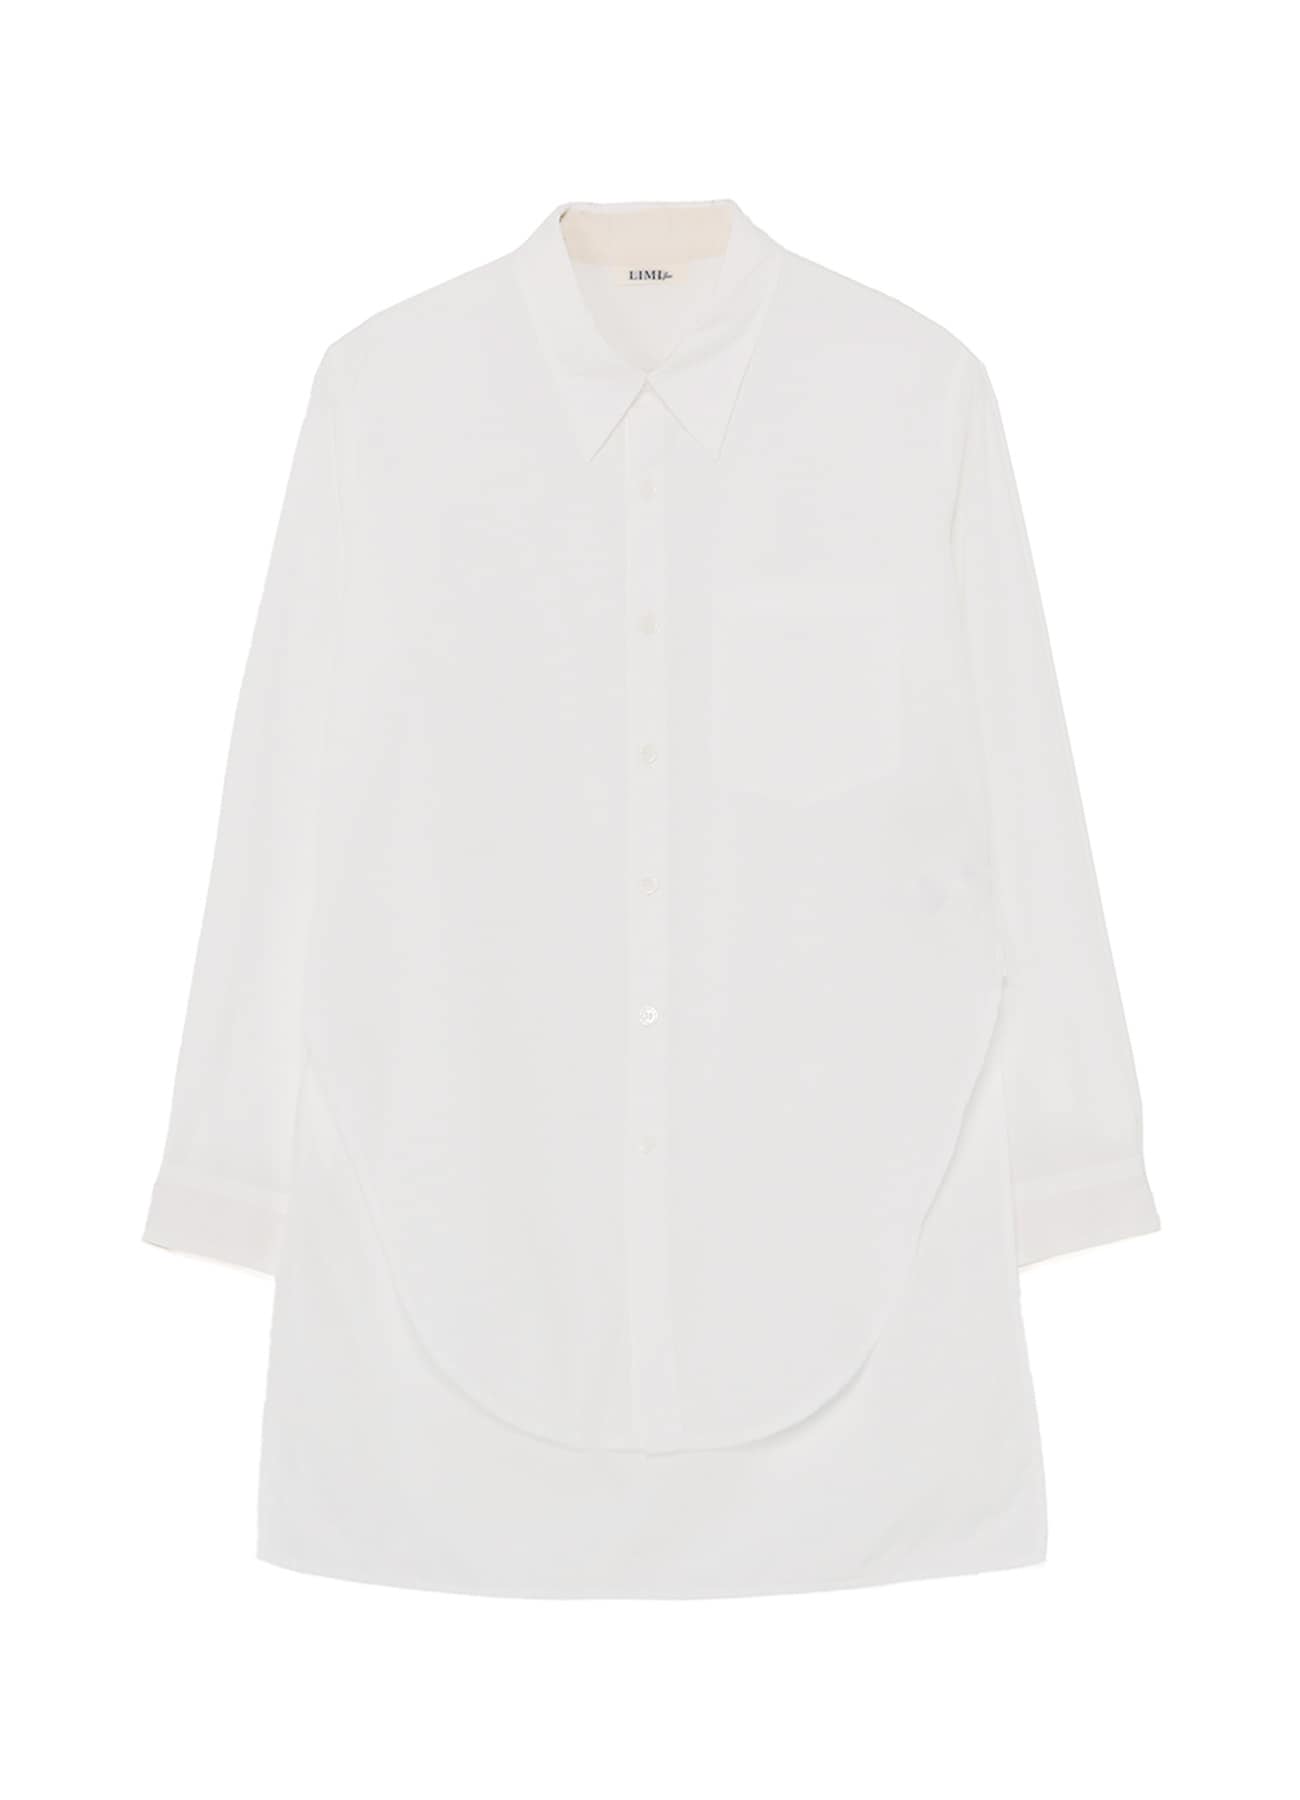 C/BROAD FRONT SLEEVE CURVE SHIRT(S white): Vintage 1.1 